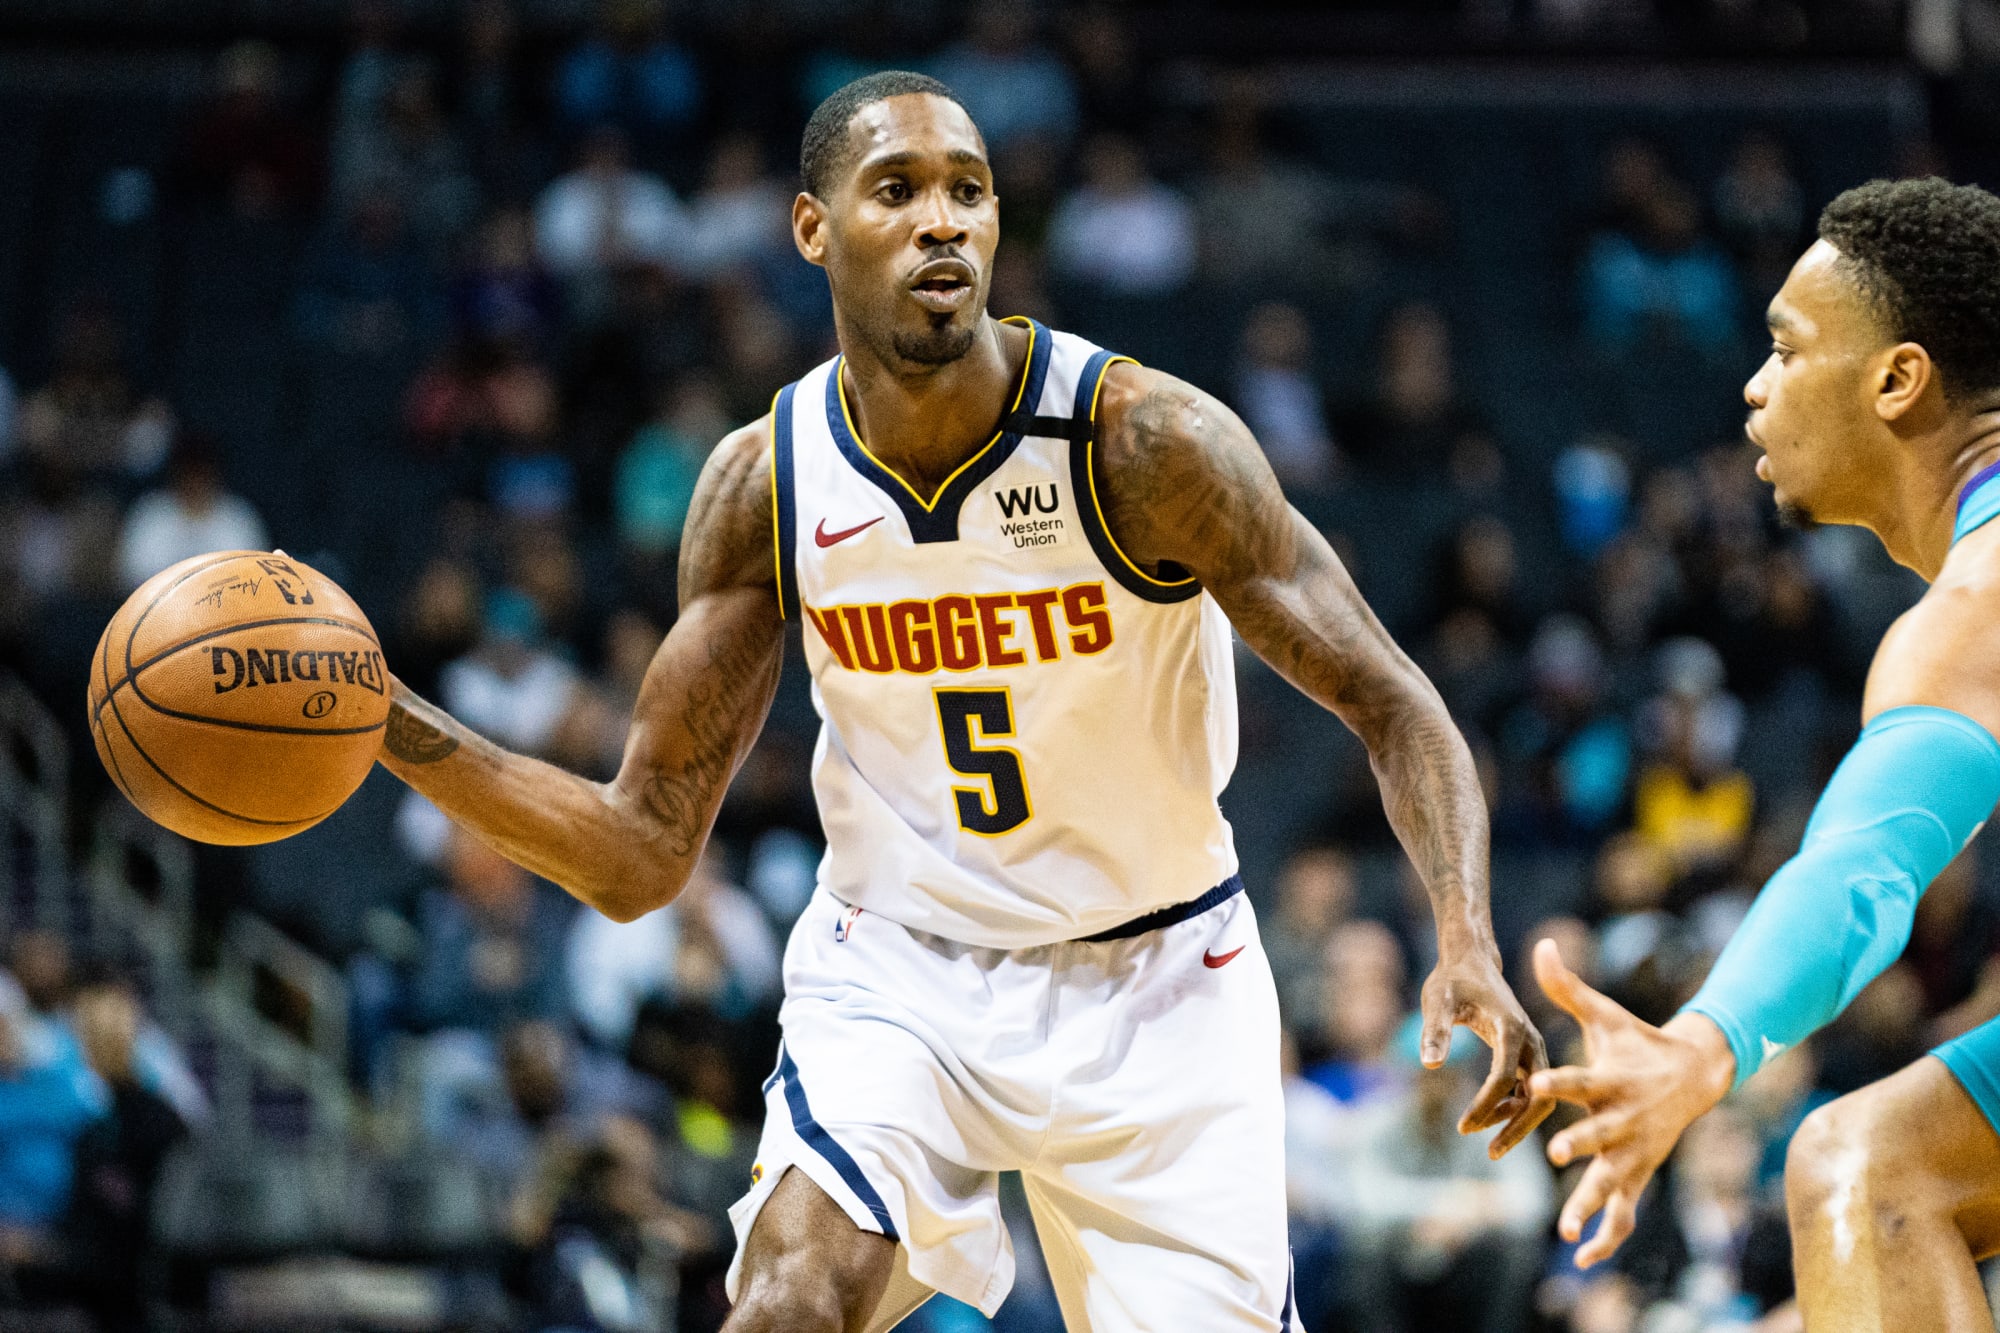 Denver Nuggets Will Barton is the most underrated player in the NBA